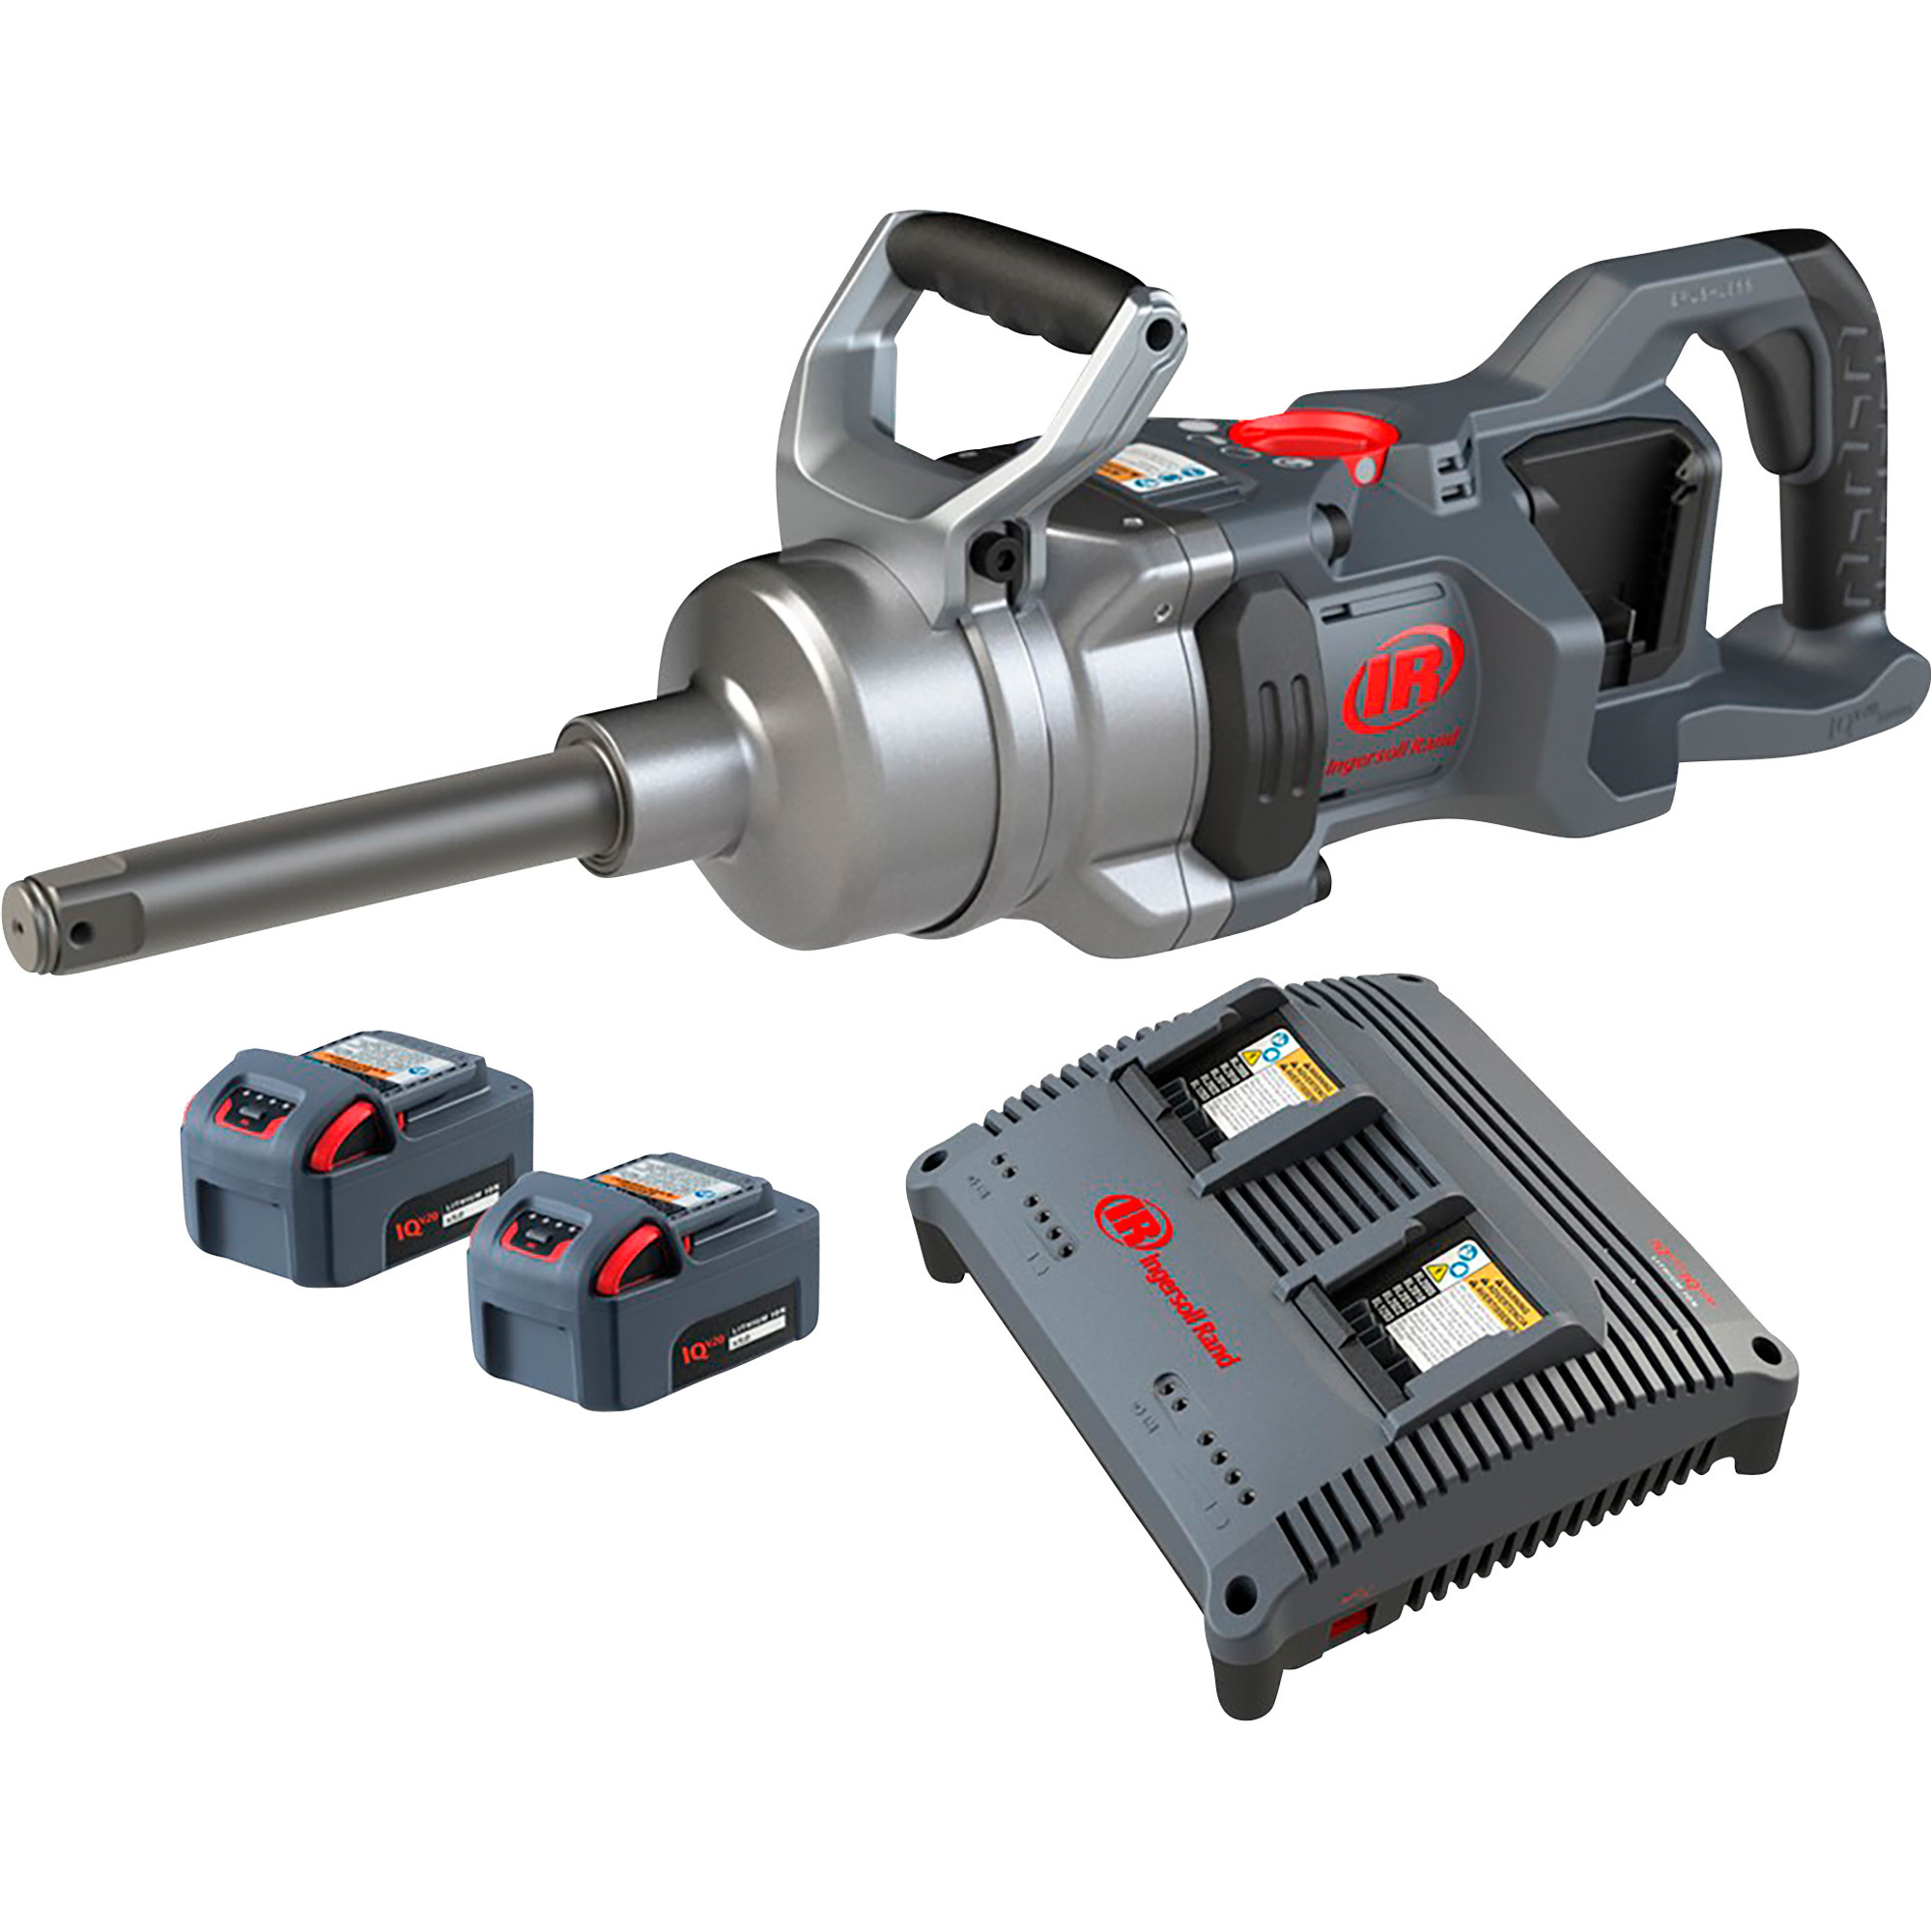 Ingersoll Rand 1Inch Cordless Impact Wrench, 20 Volts, 2 Batteries, Model W9691-K2E